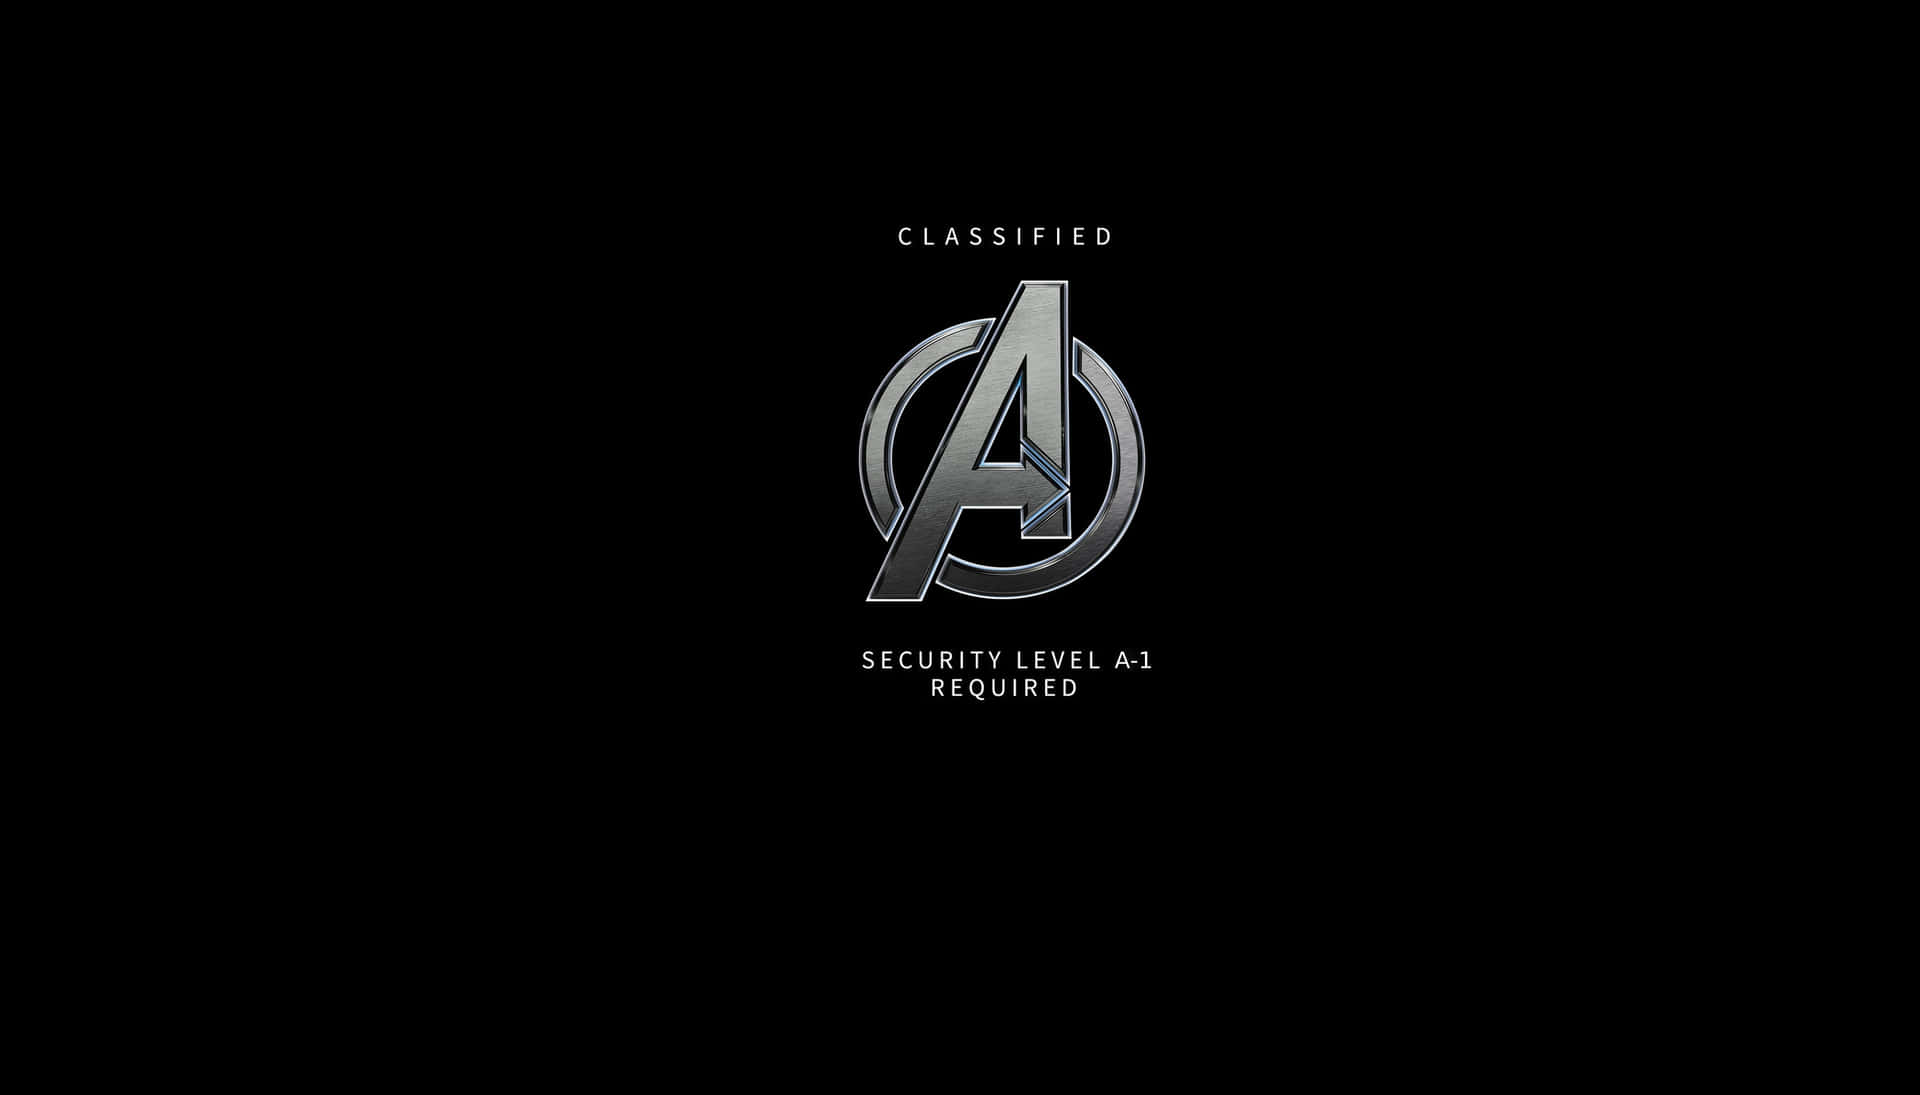 Avengers Classified Security Level A1 Background